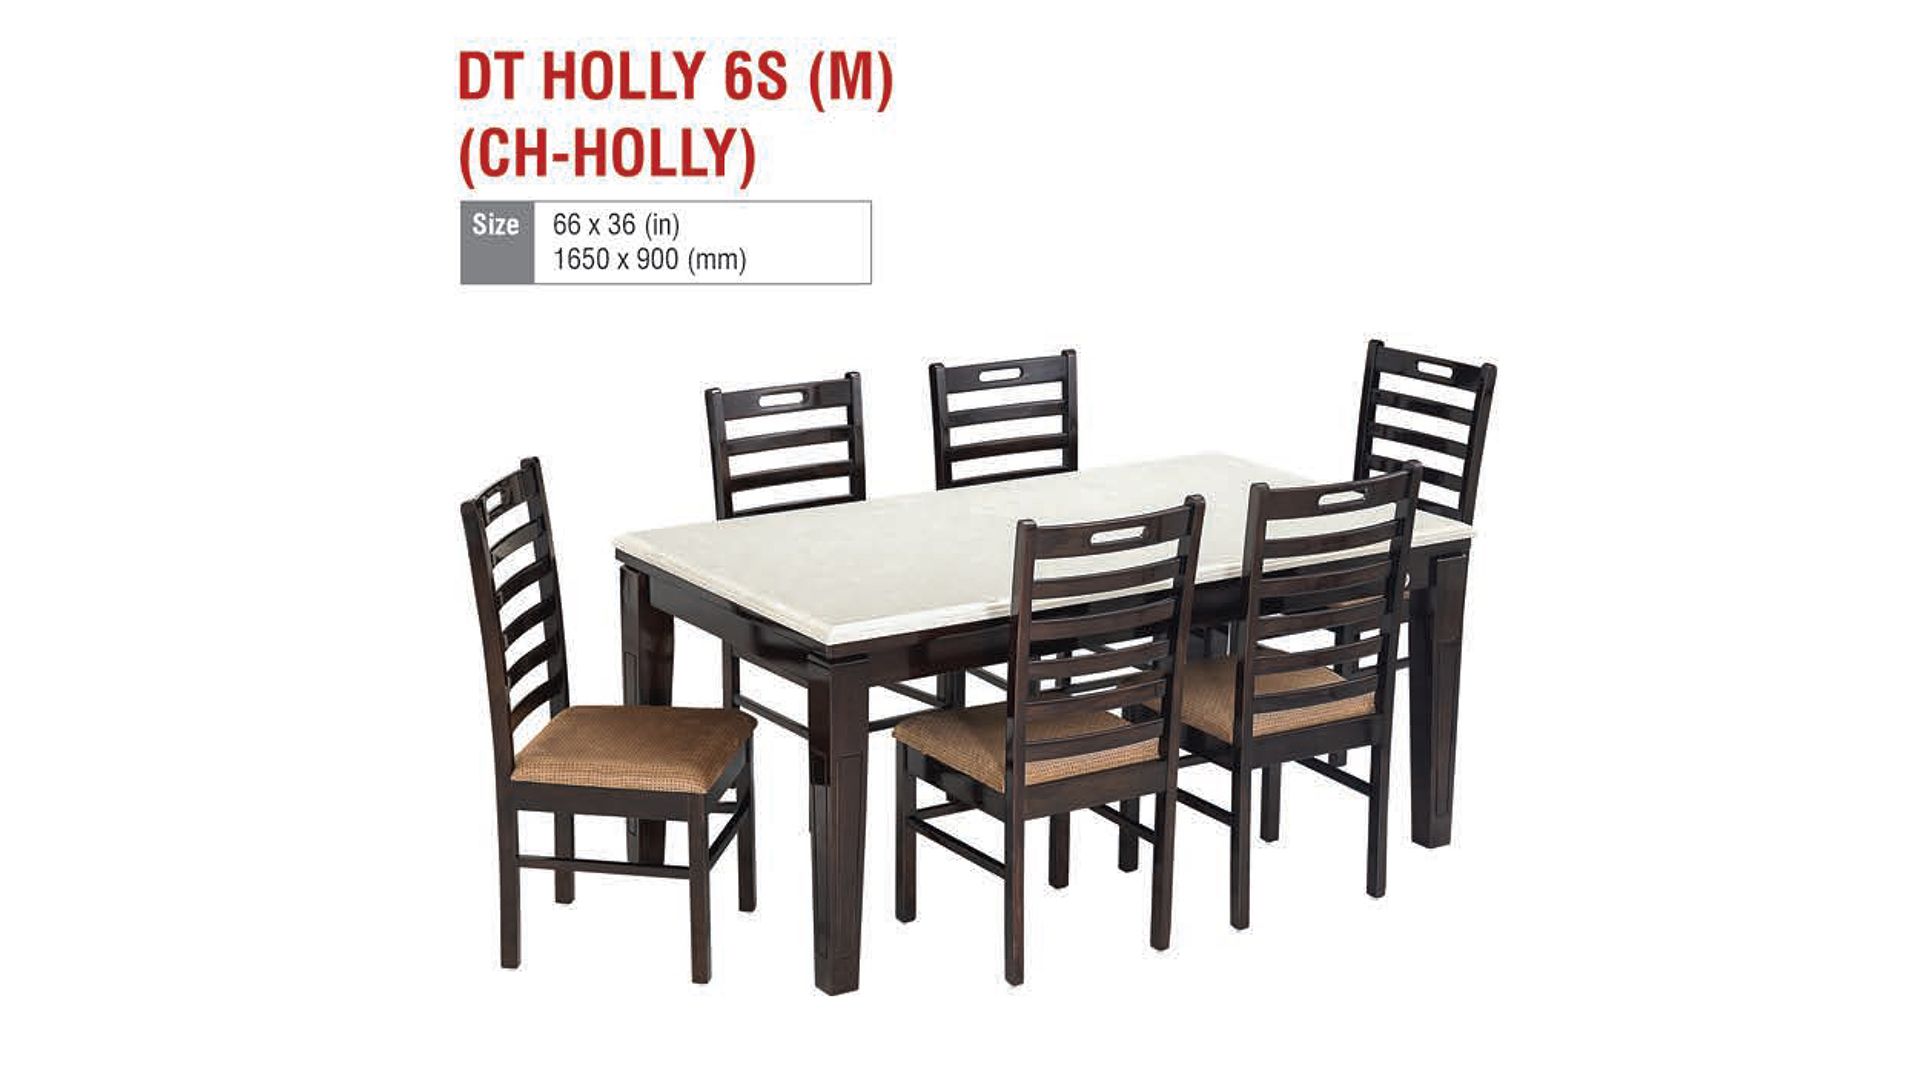 DT HOLLY 6S (M) (CH-HOLLY)